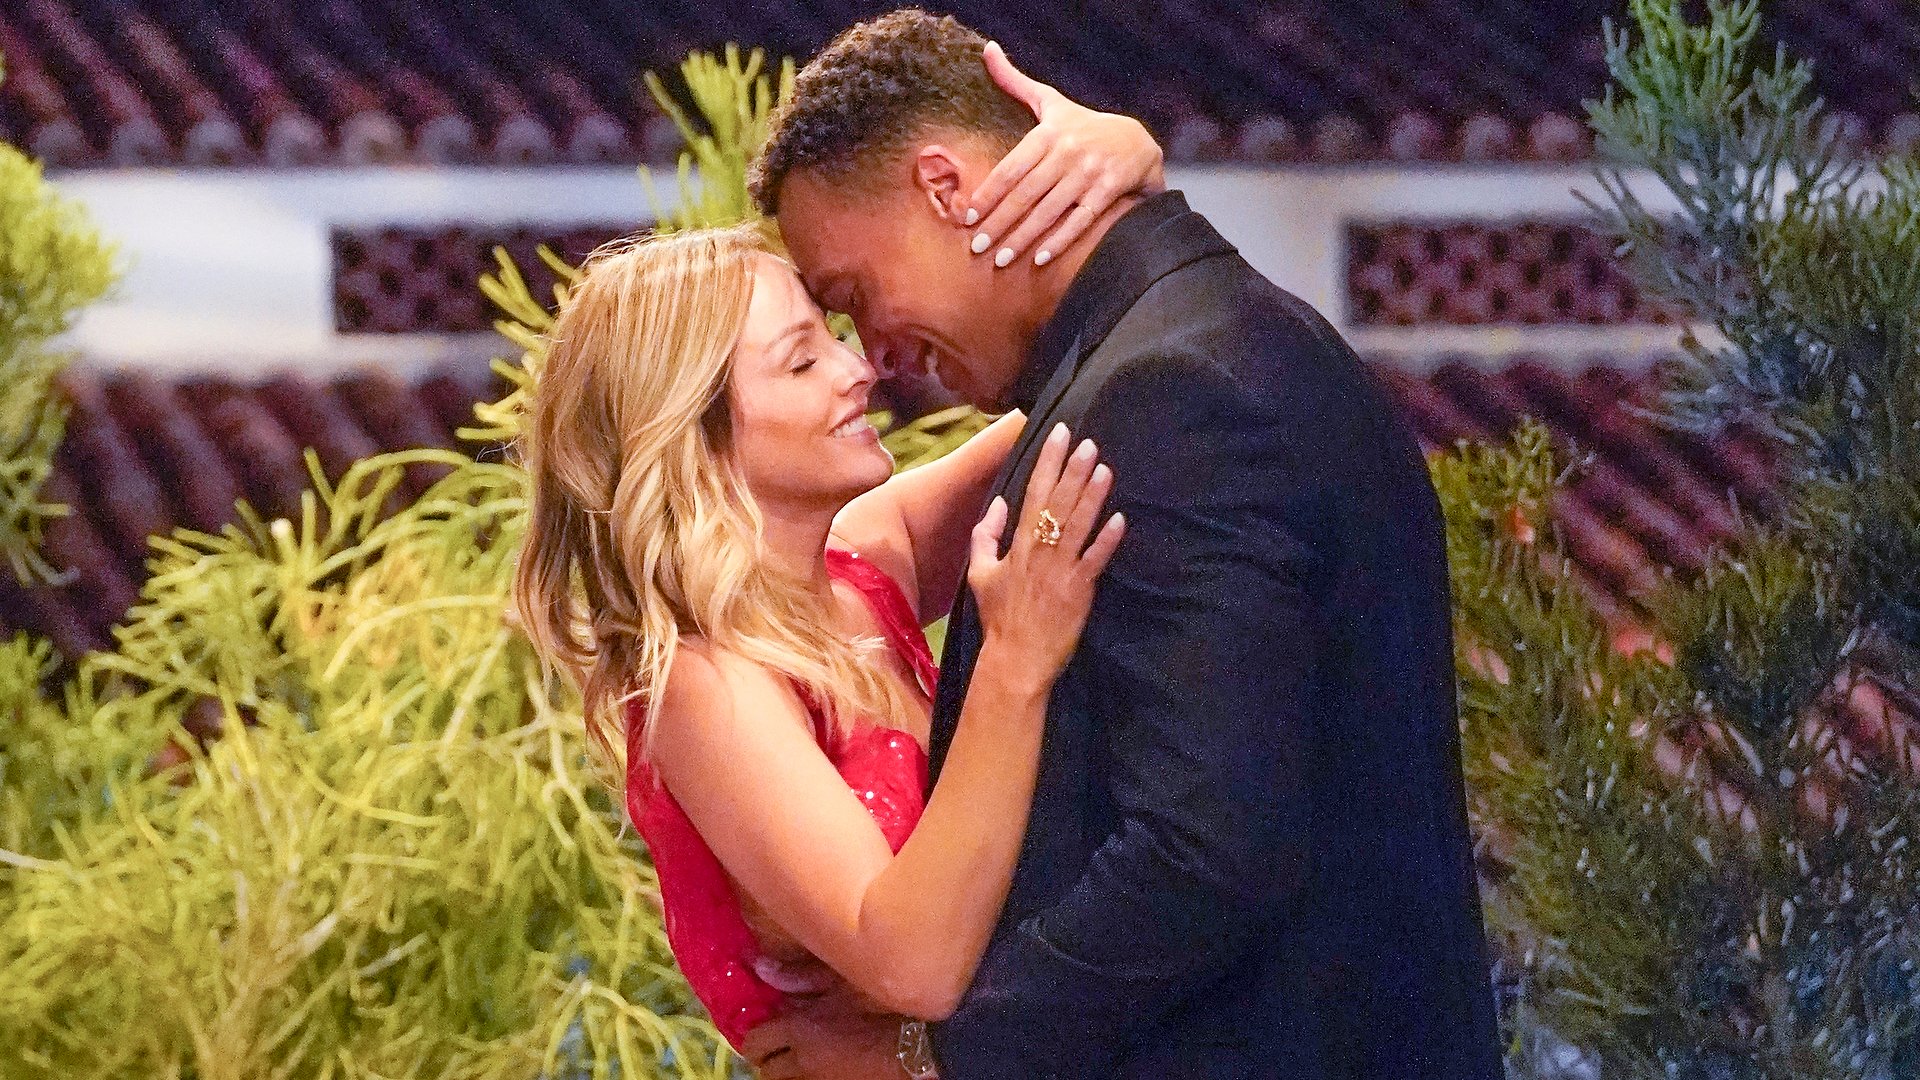 Clare Crawley and Dale Moss dancing together on 'The Bachelorette' Season 16 Episode 4 in 2020